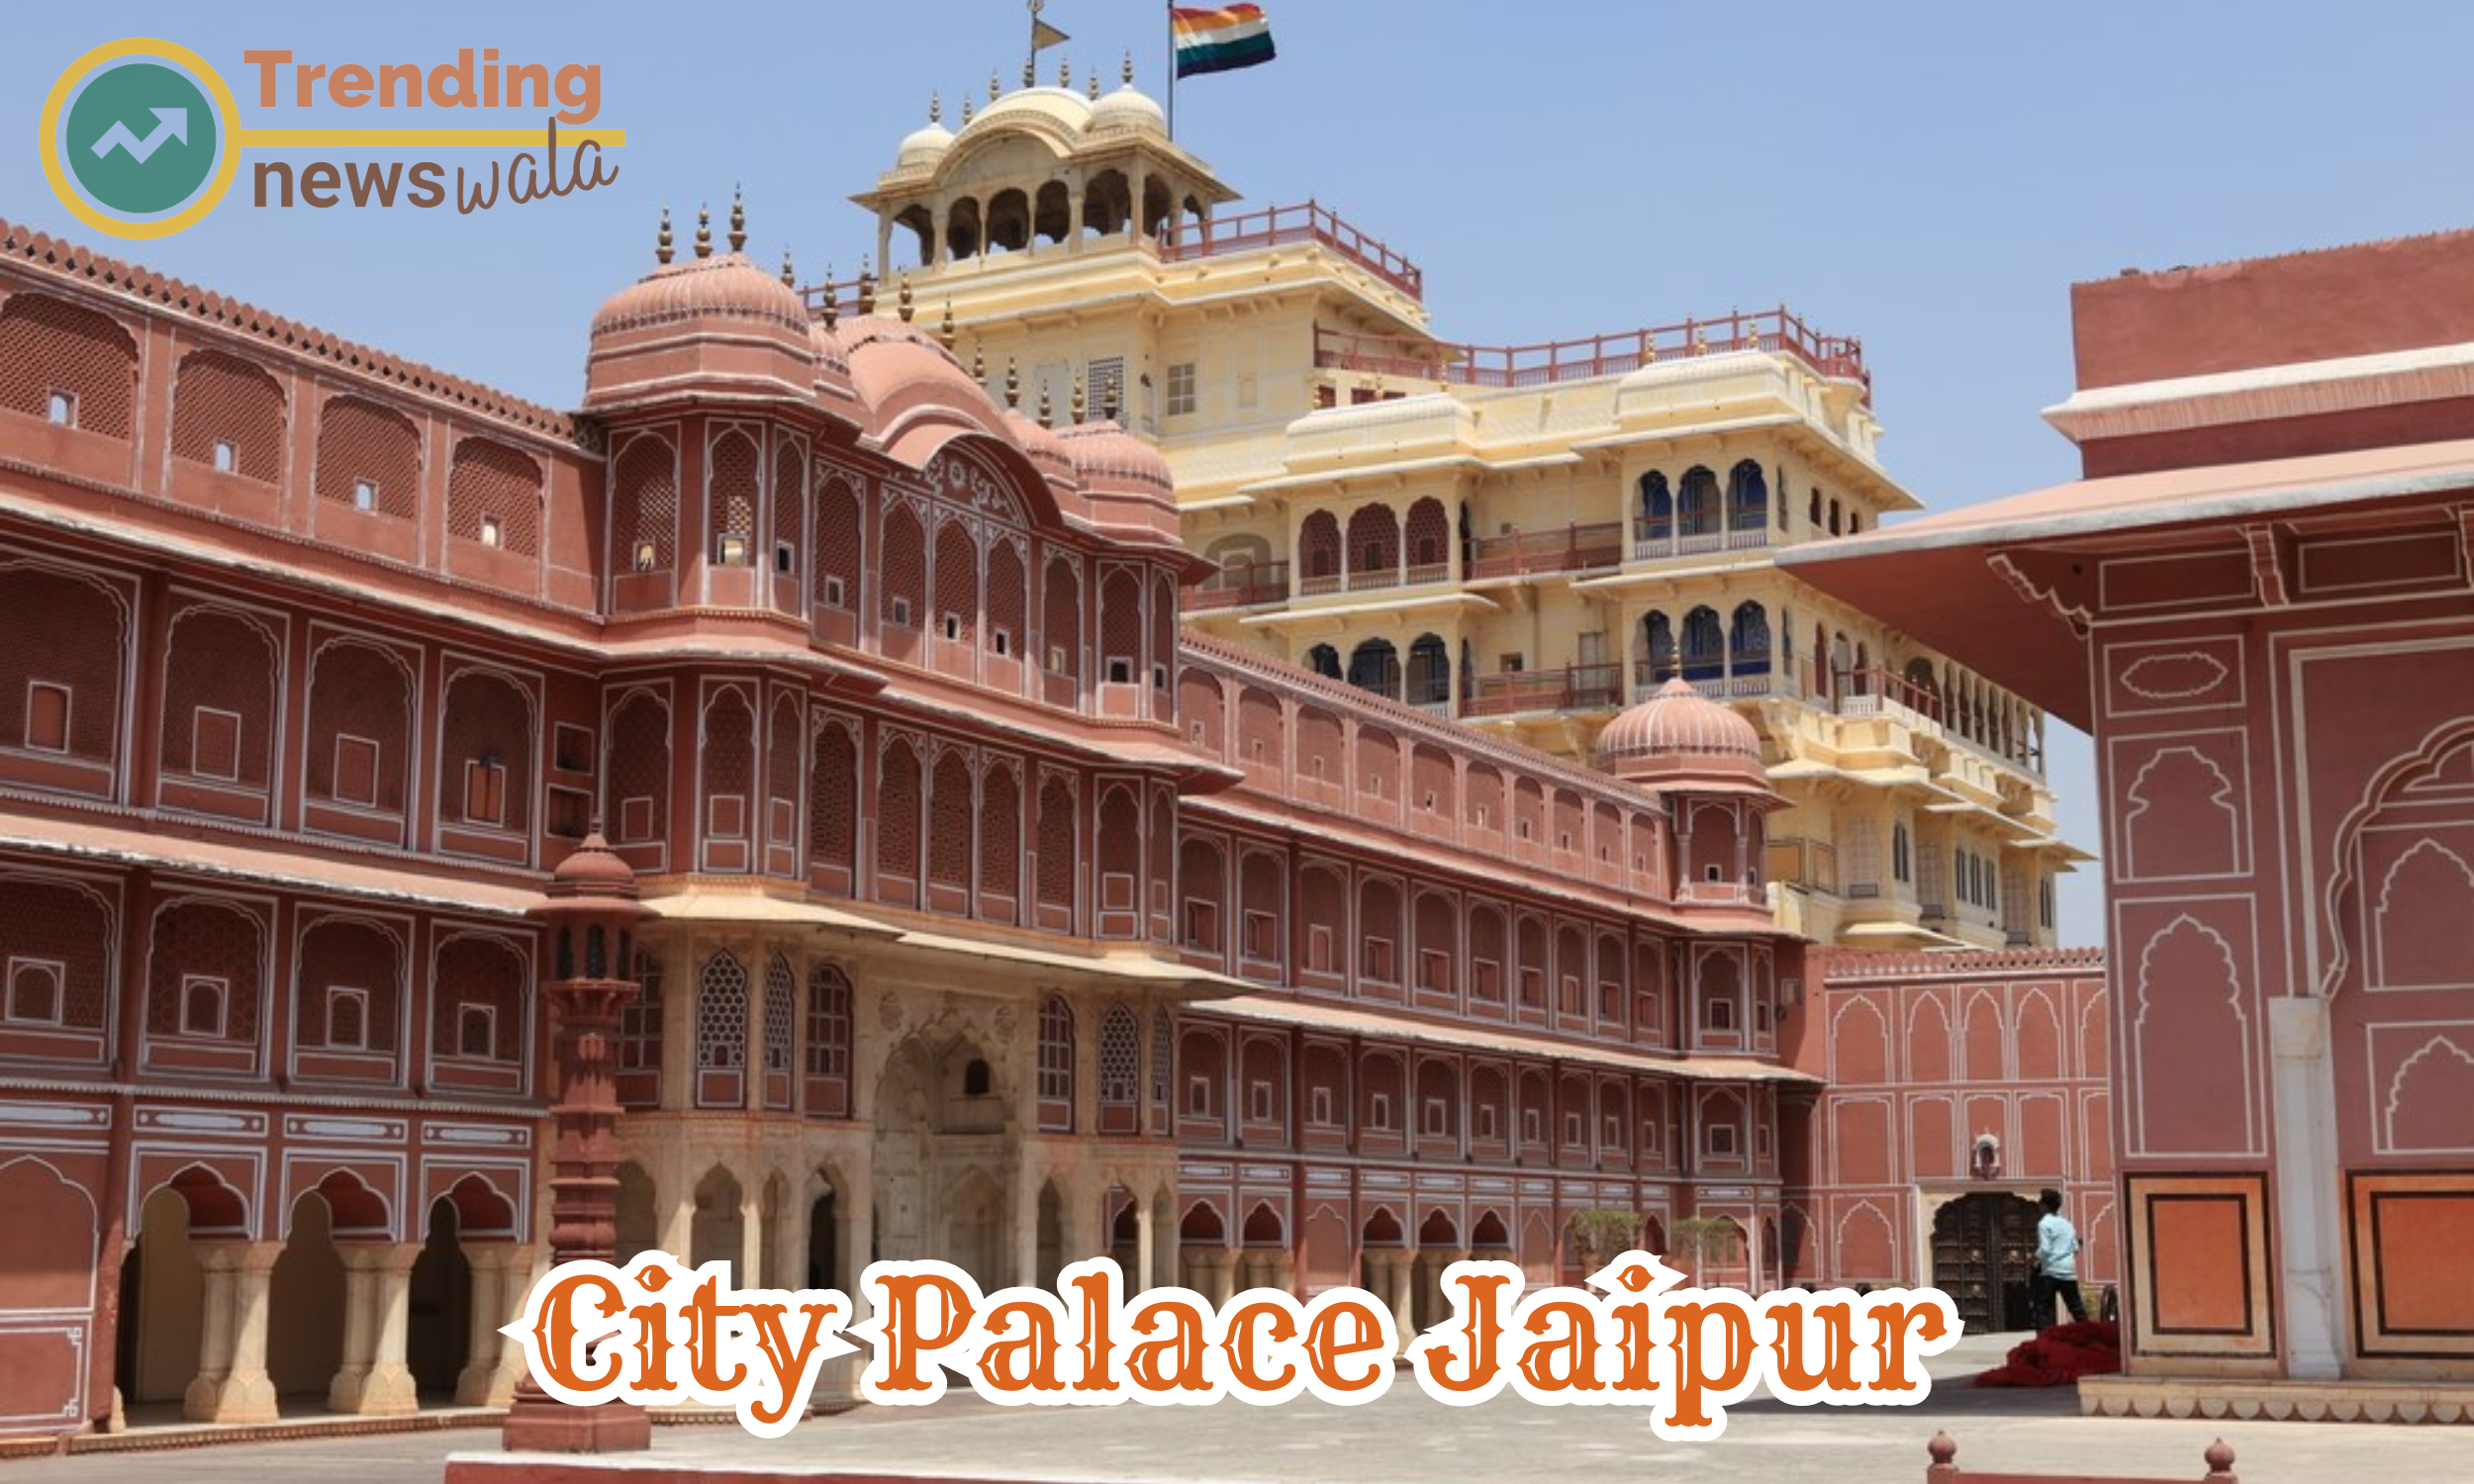 The layout of the City Palace Jaipur: